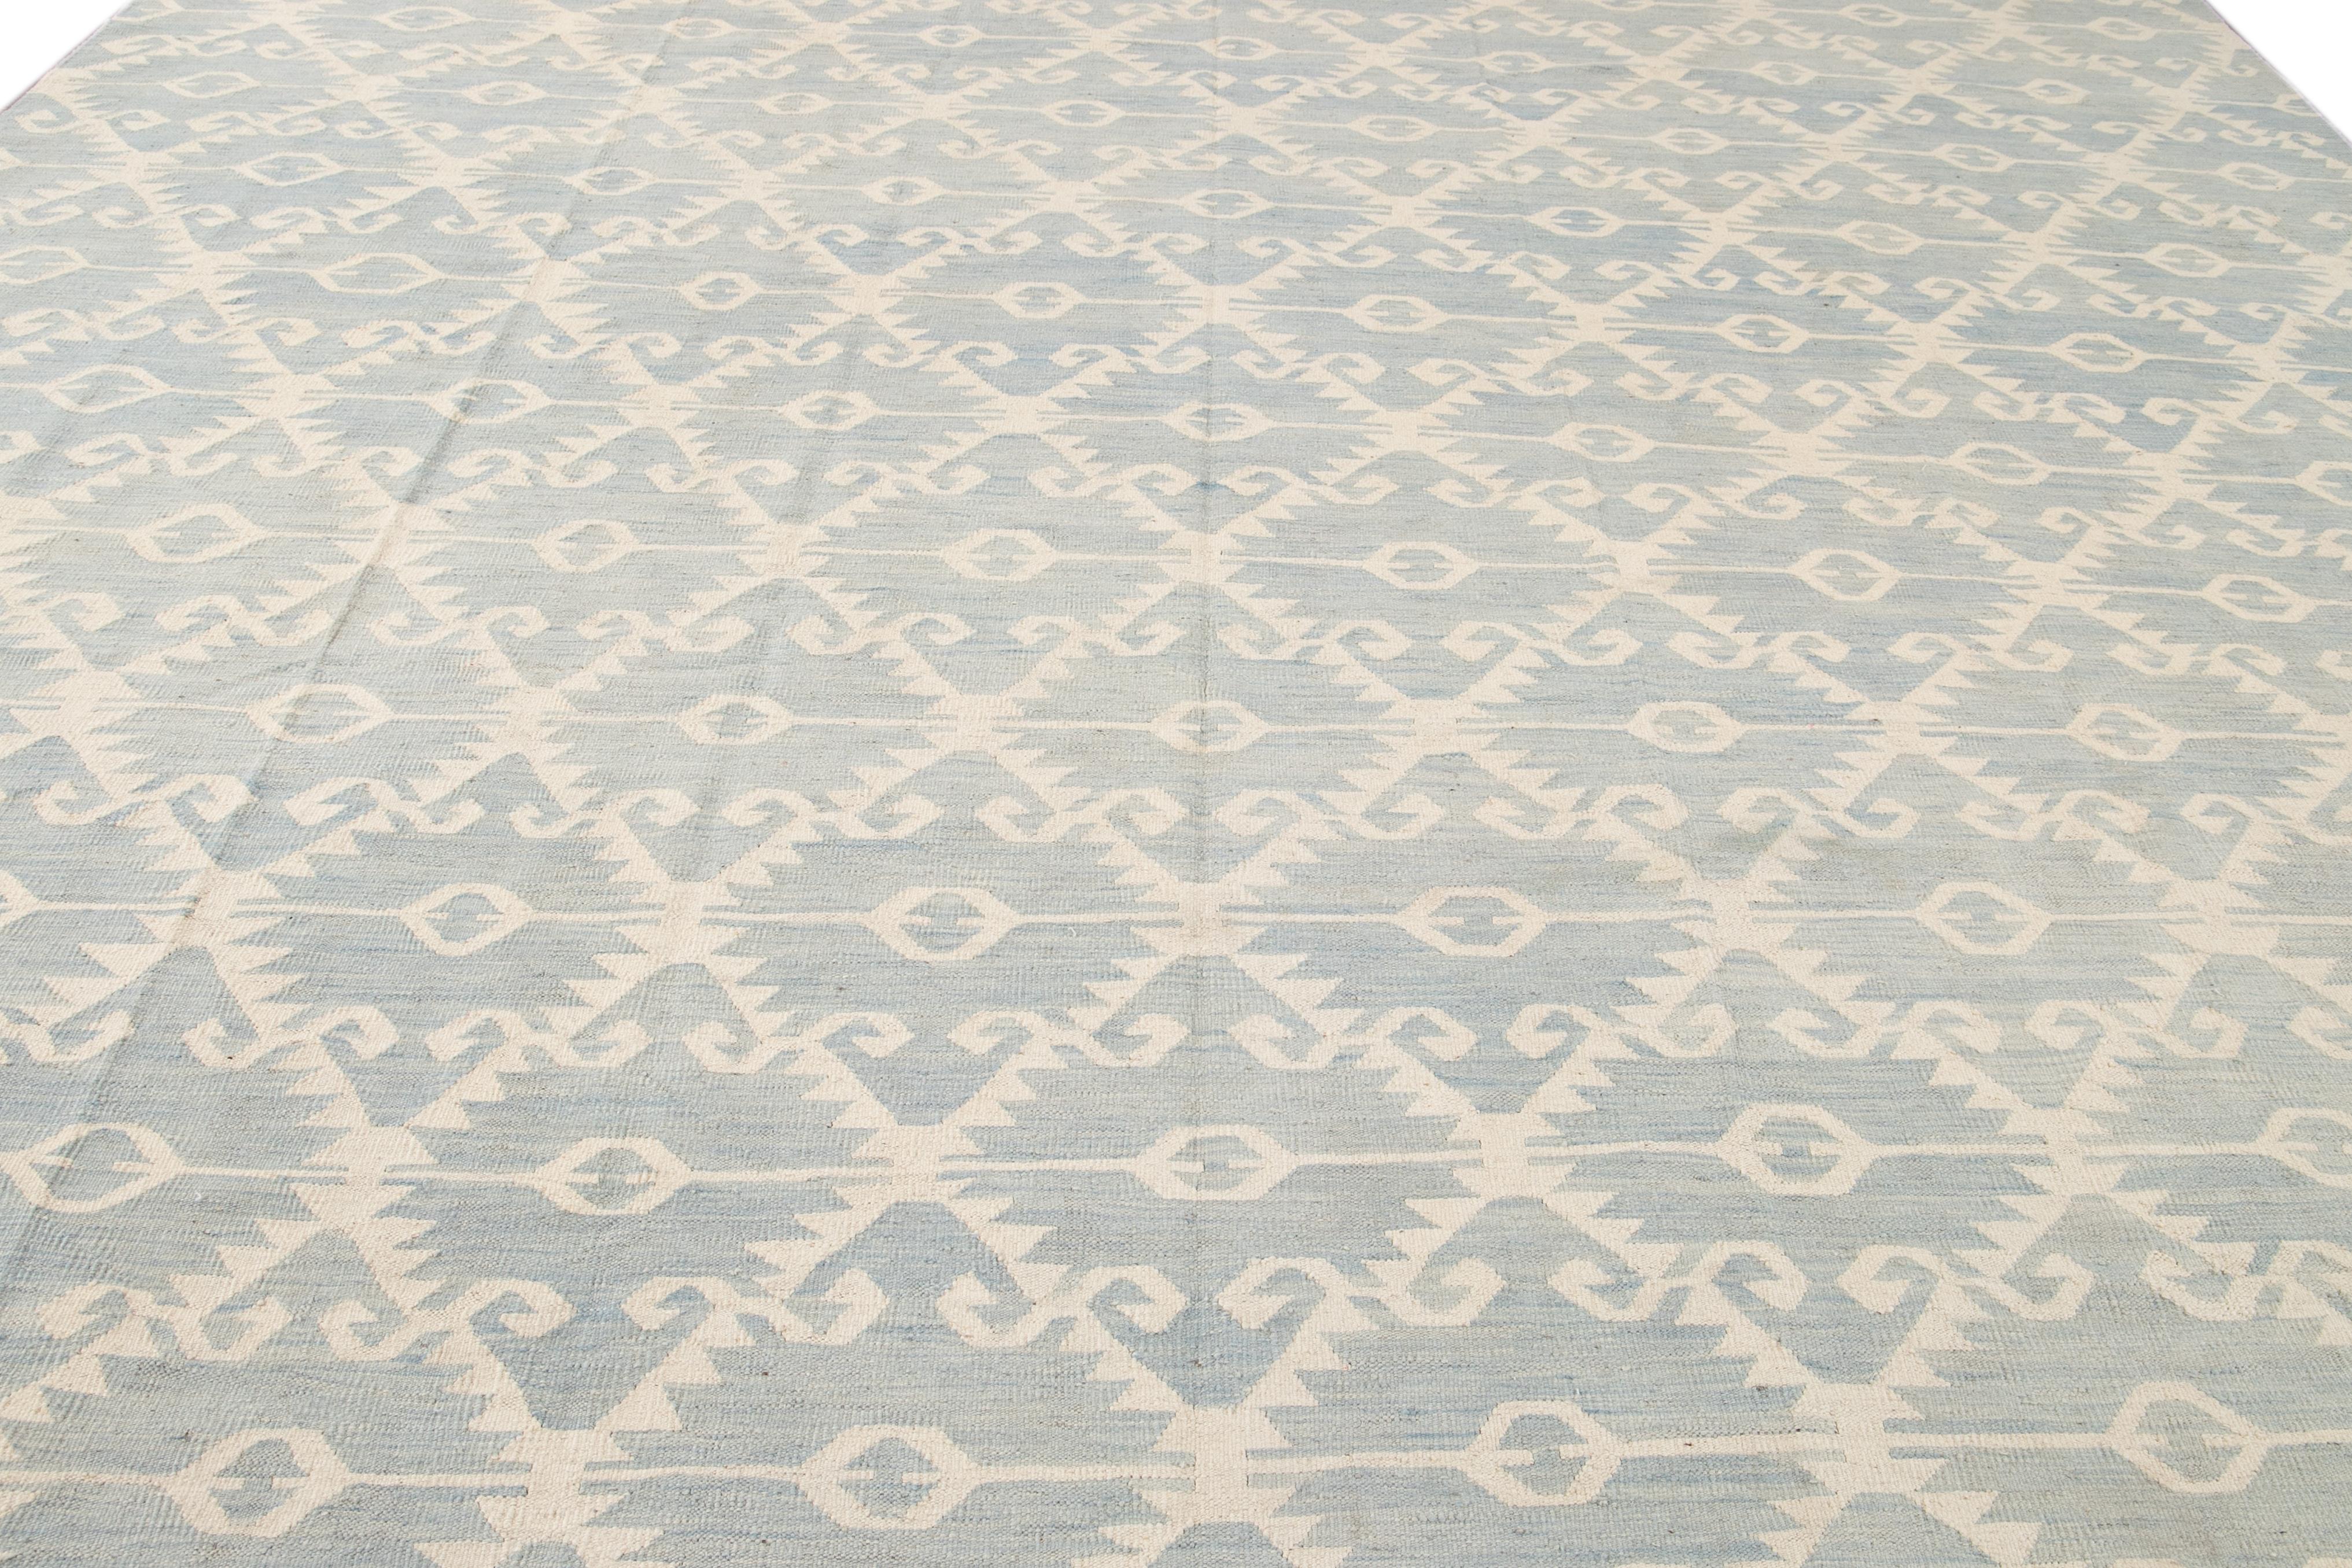 This premium wool Kilim flatweave rug displays a stunning modern beige motif. It features a light blue background with a comprehensive tribal pattern.

This rug measures 12'2